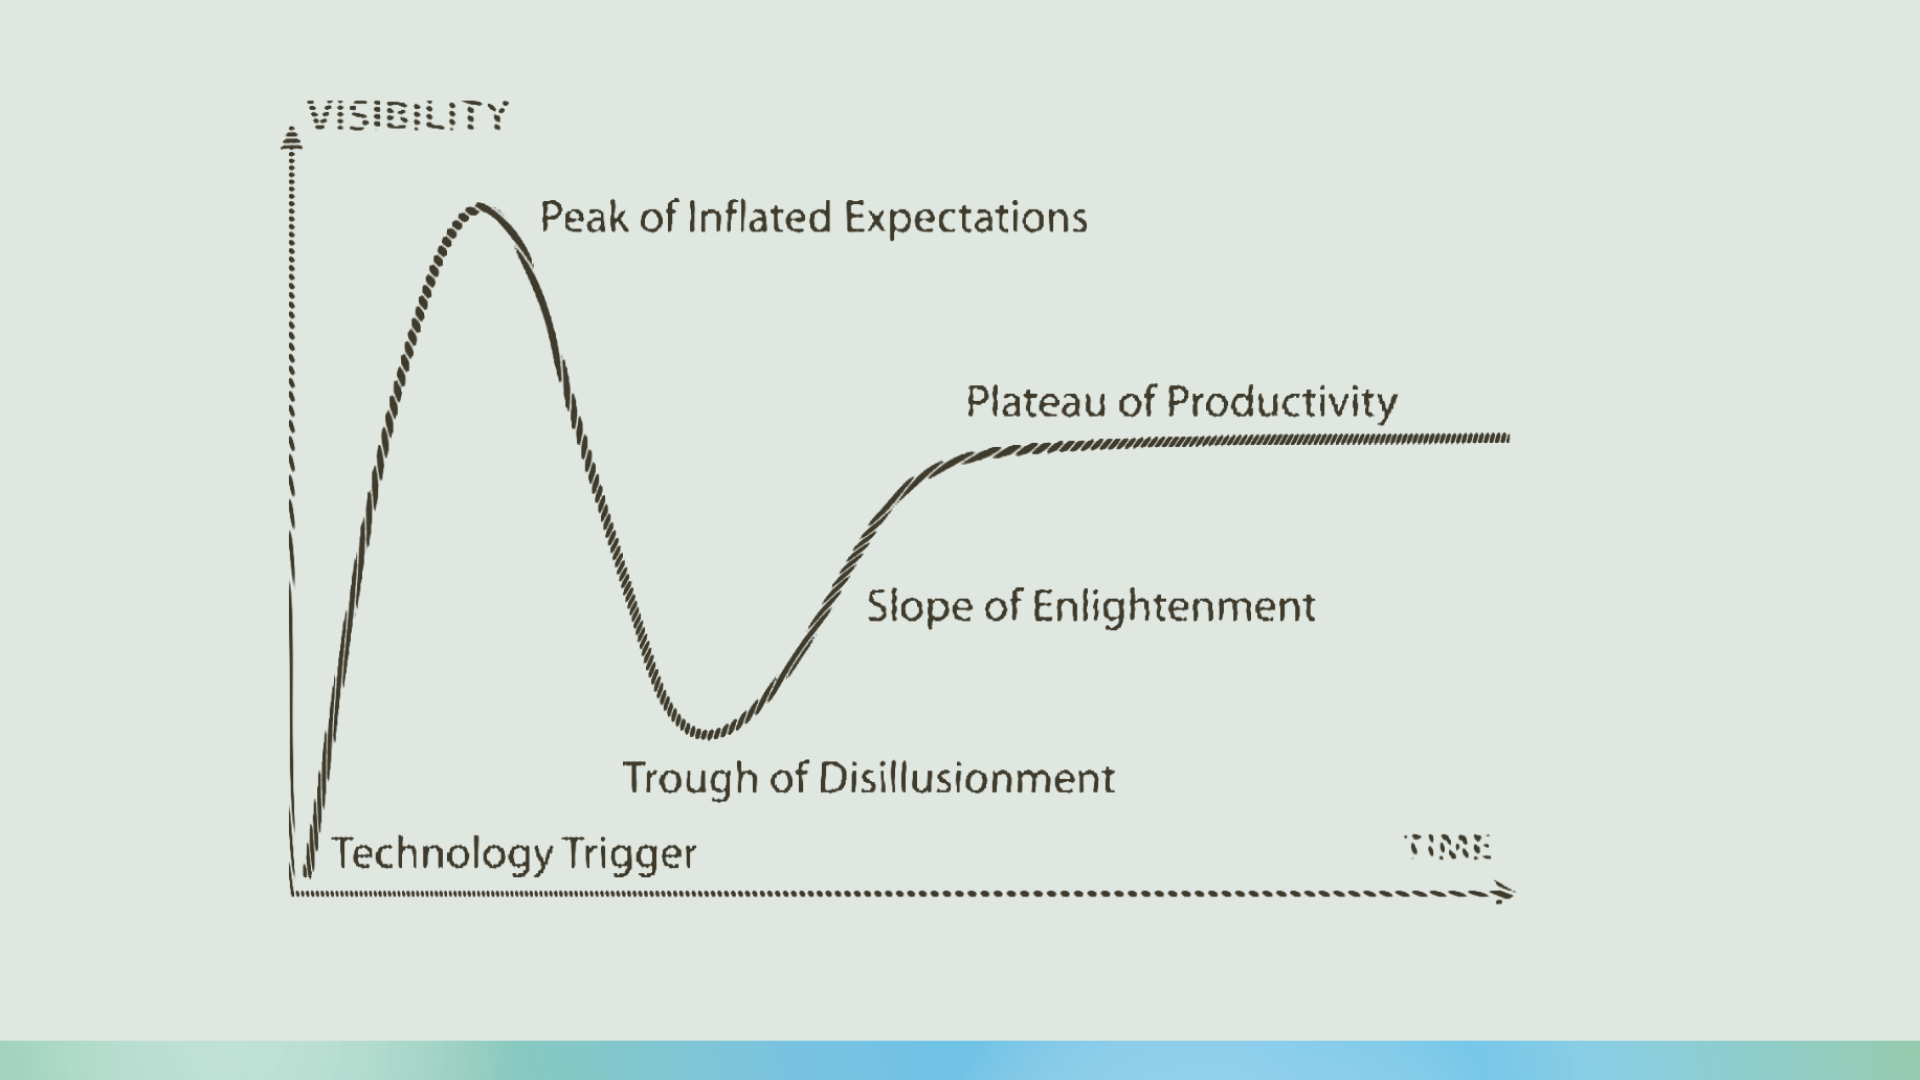 The journey of Enterprise Taxonomy through the Gartner 'Hype-Cycle'